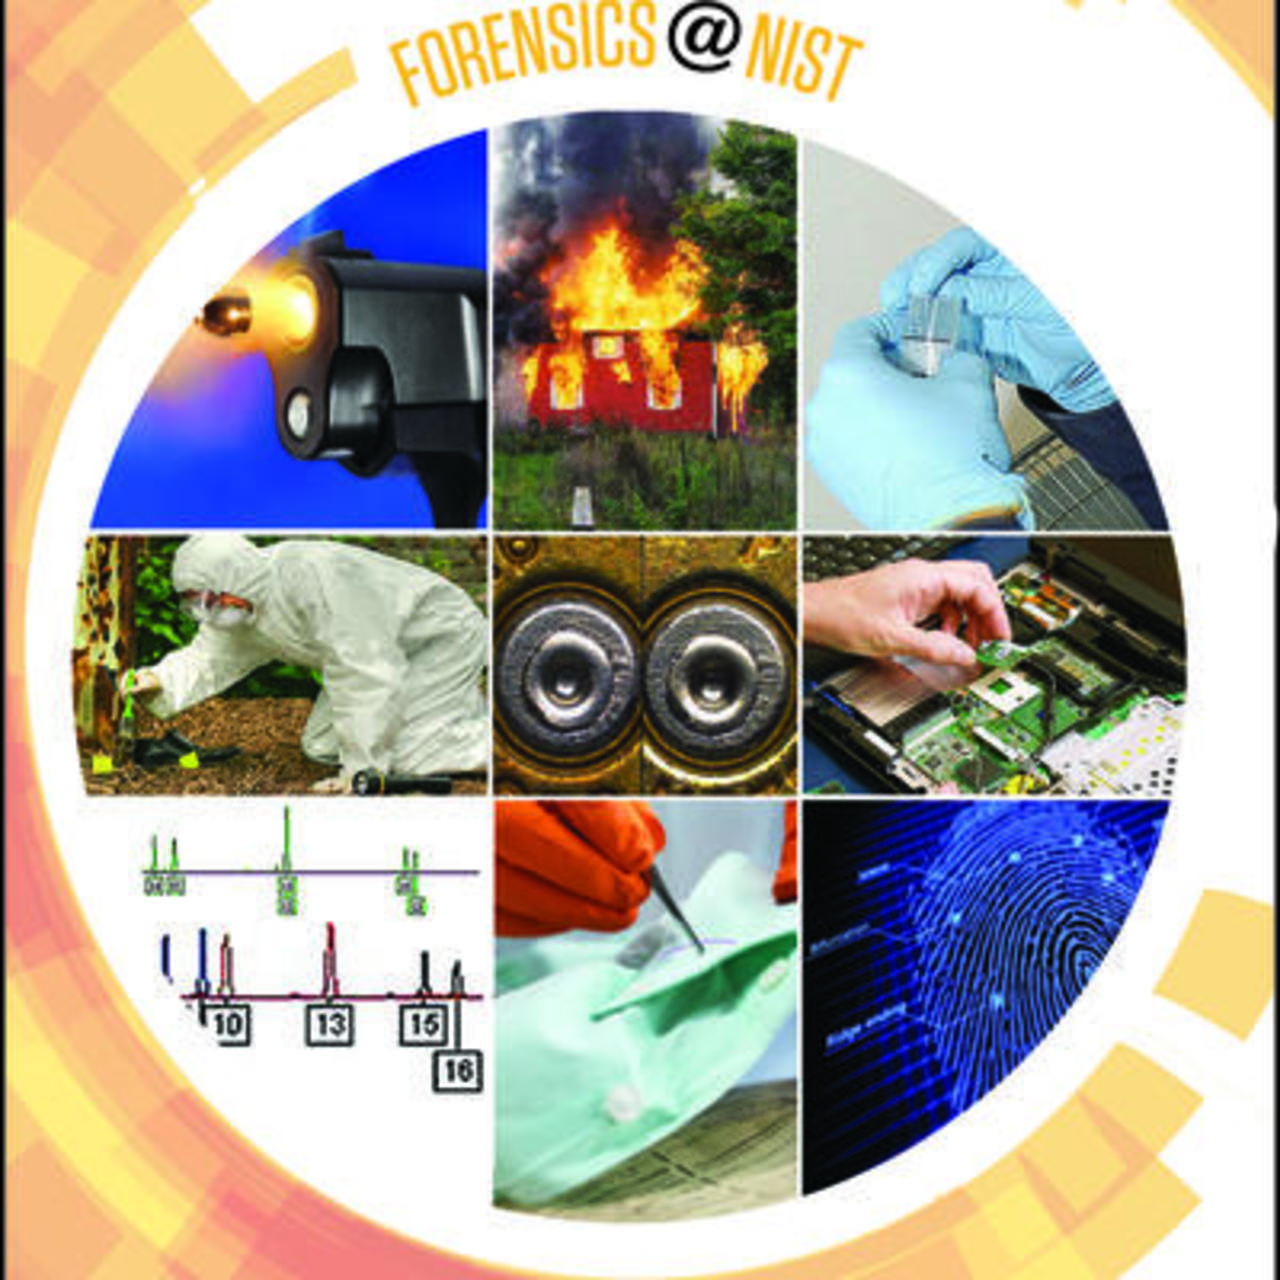 APPLICATION AND IMPLEMENTATION OF 3D TECHNOLOGY, ALGORITHMS, AND STATISTICS FOR FORENSIC FIREARM AND TOOLMARK ANALYSIS 4